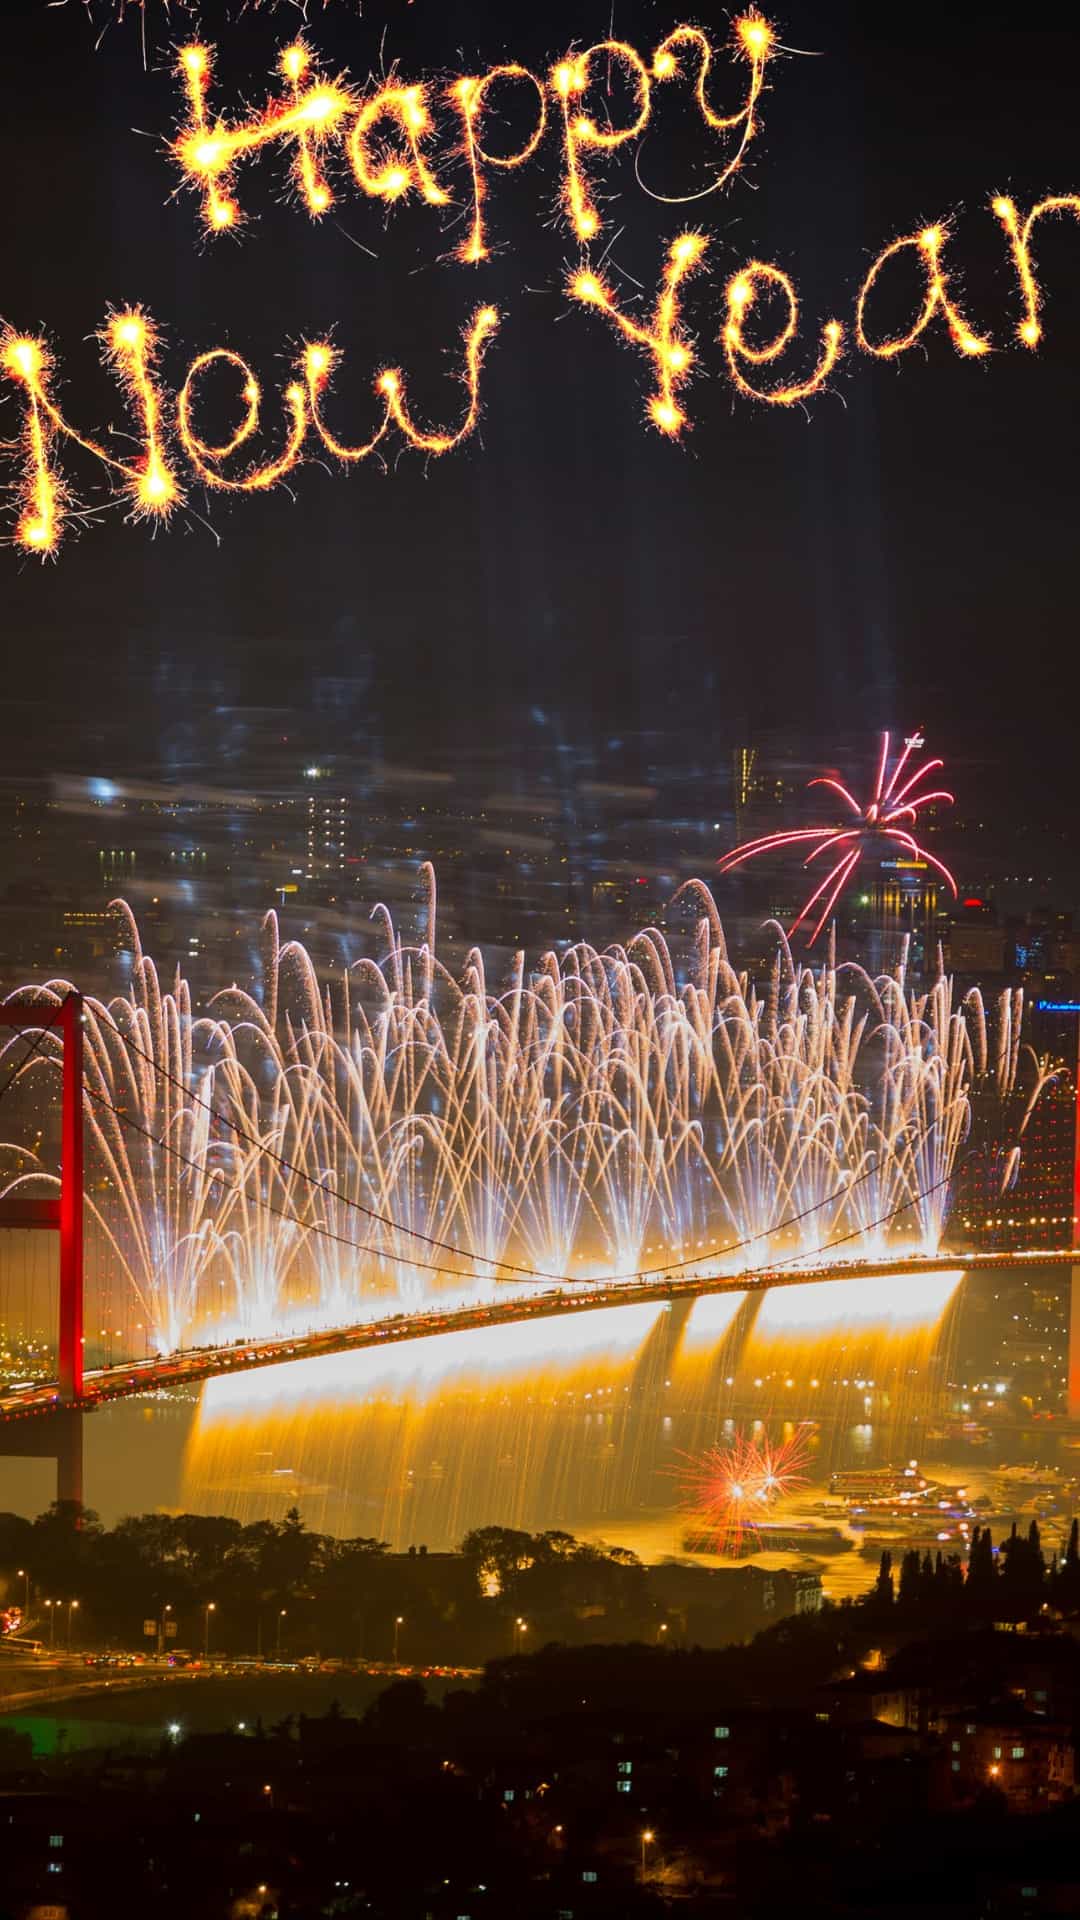 A fireworks display over the bridge and city - New Year